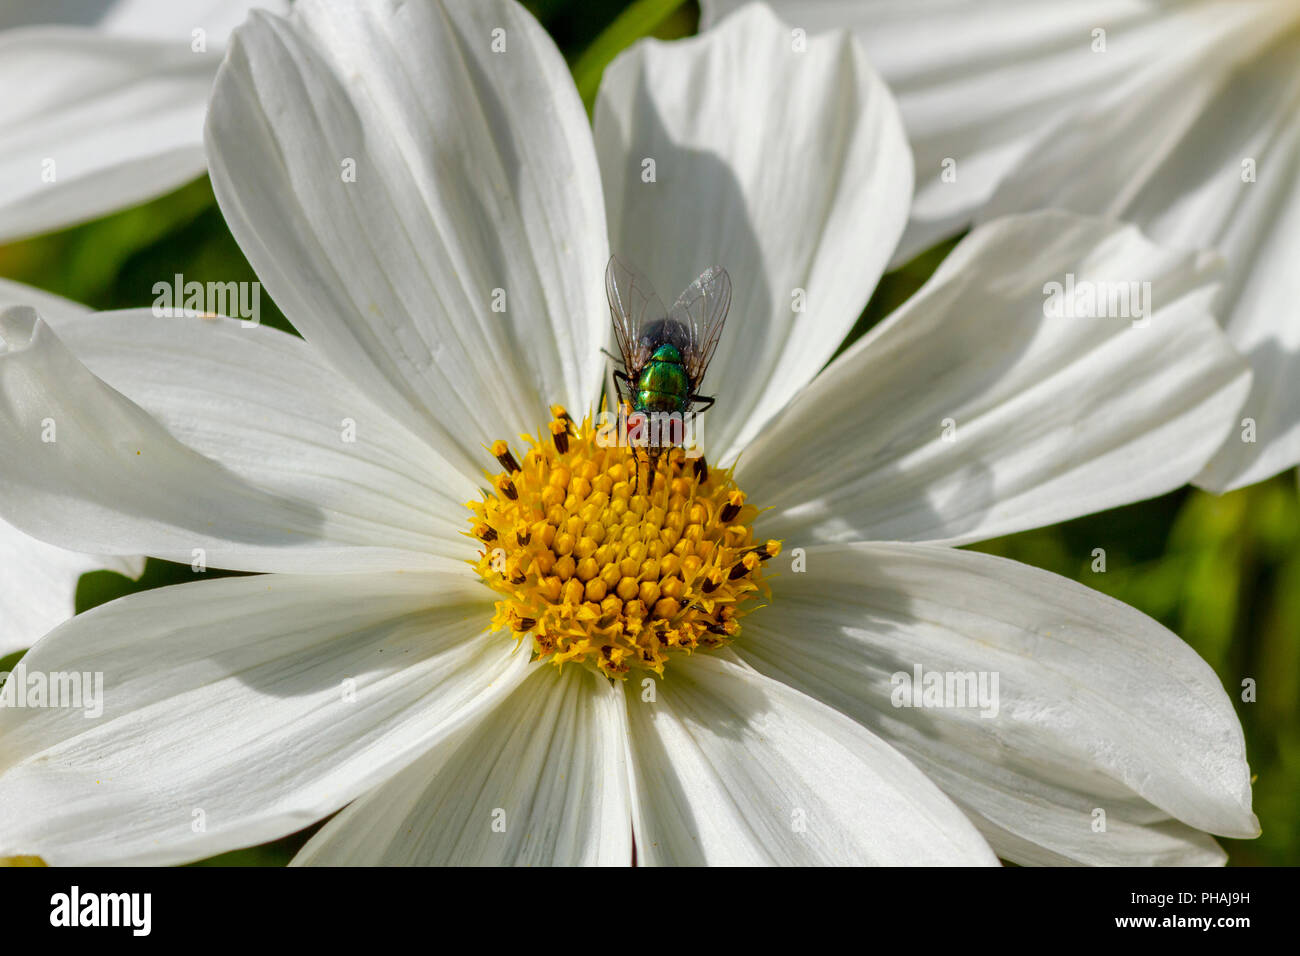 Green bottle fly on Cosmos flower Stock Photo